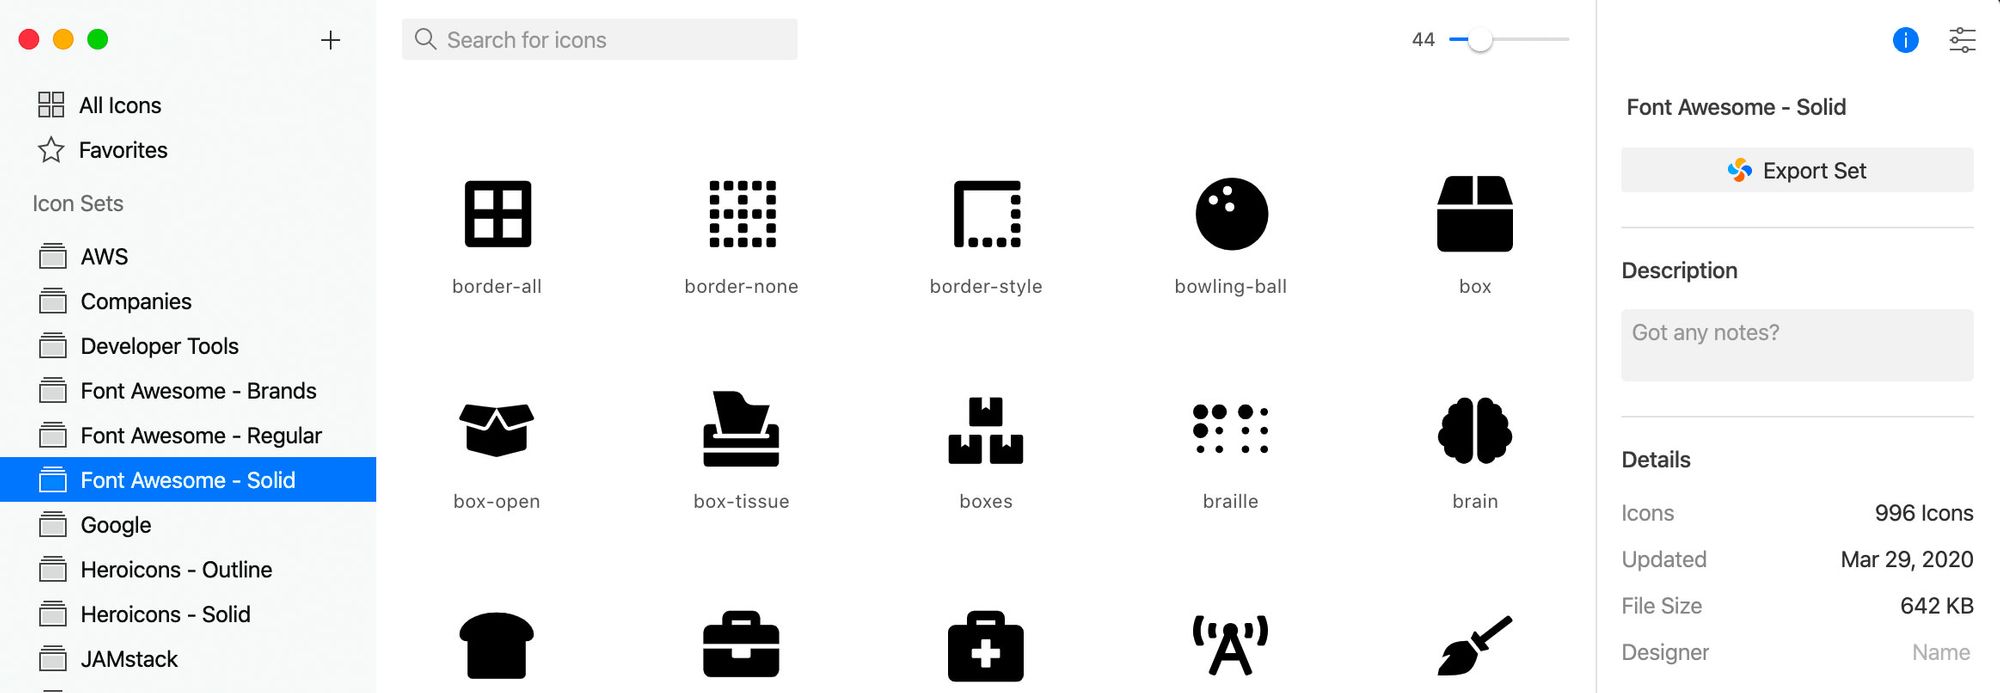 iconset-full-library